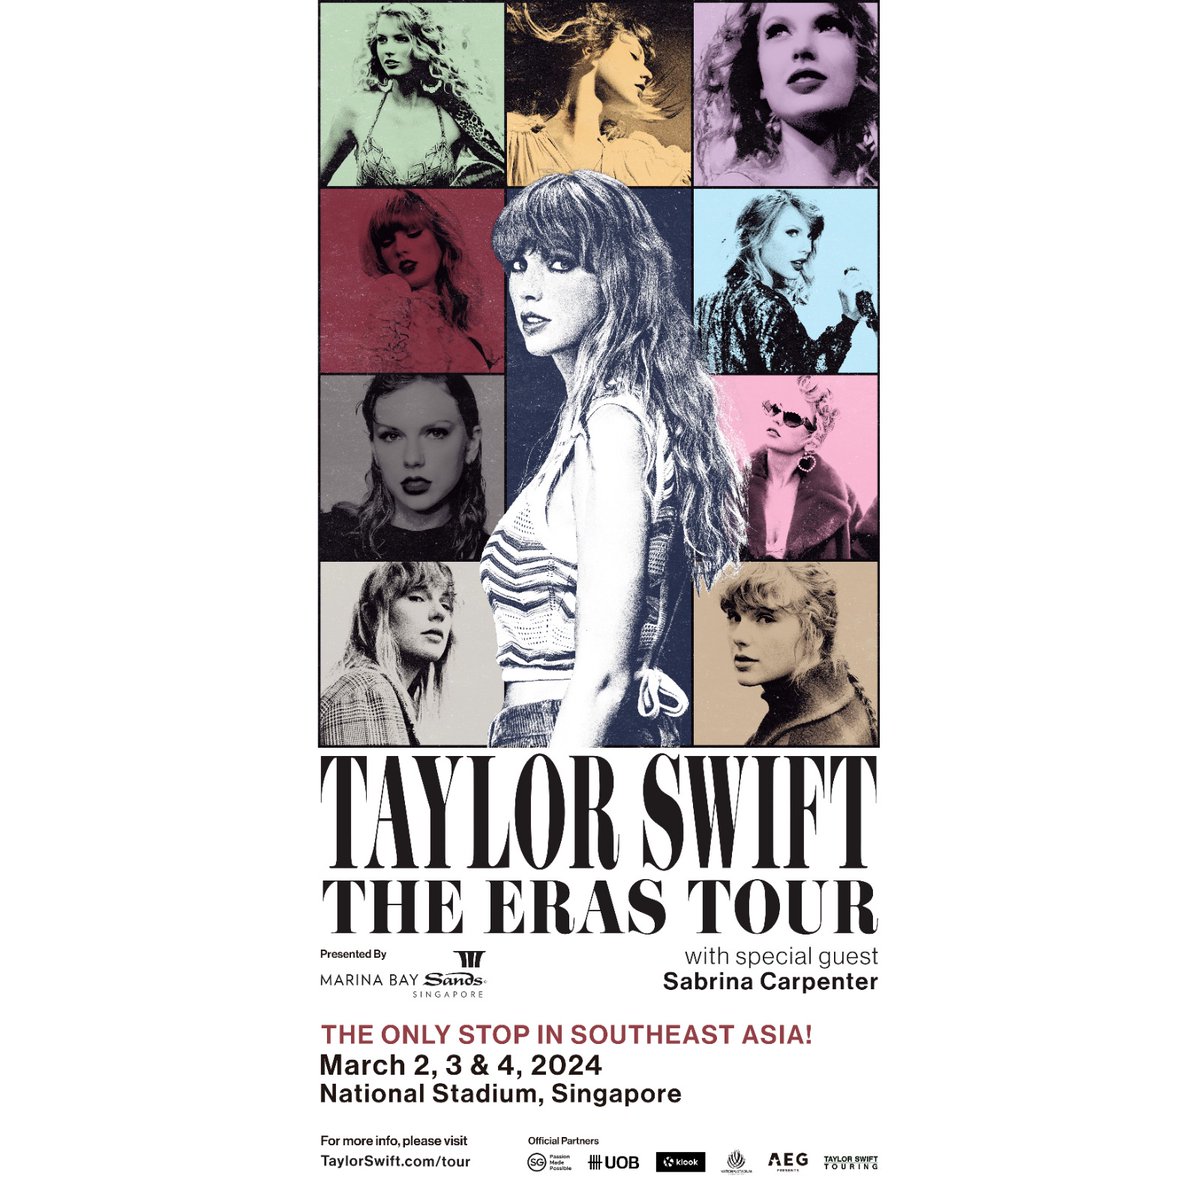 💫 TAYLOR SWIFT: THE ERAS TOUR IN SG || SLOT RESERVATION 💫

📌PROOFS: bit.ly/3JXFLid
📄FORM: bit.ly/3TncFLX

✔️ Fast Internet
✔️ Open to local and international fans
✔️ 500+ secured tickets

‼️ Please read the infos carefully before submitting your form/s.

📥…